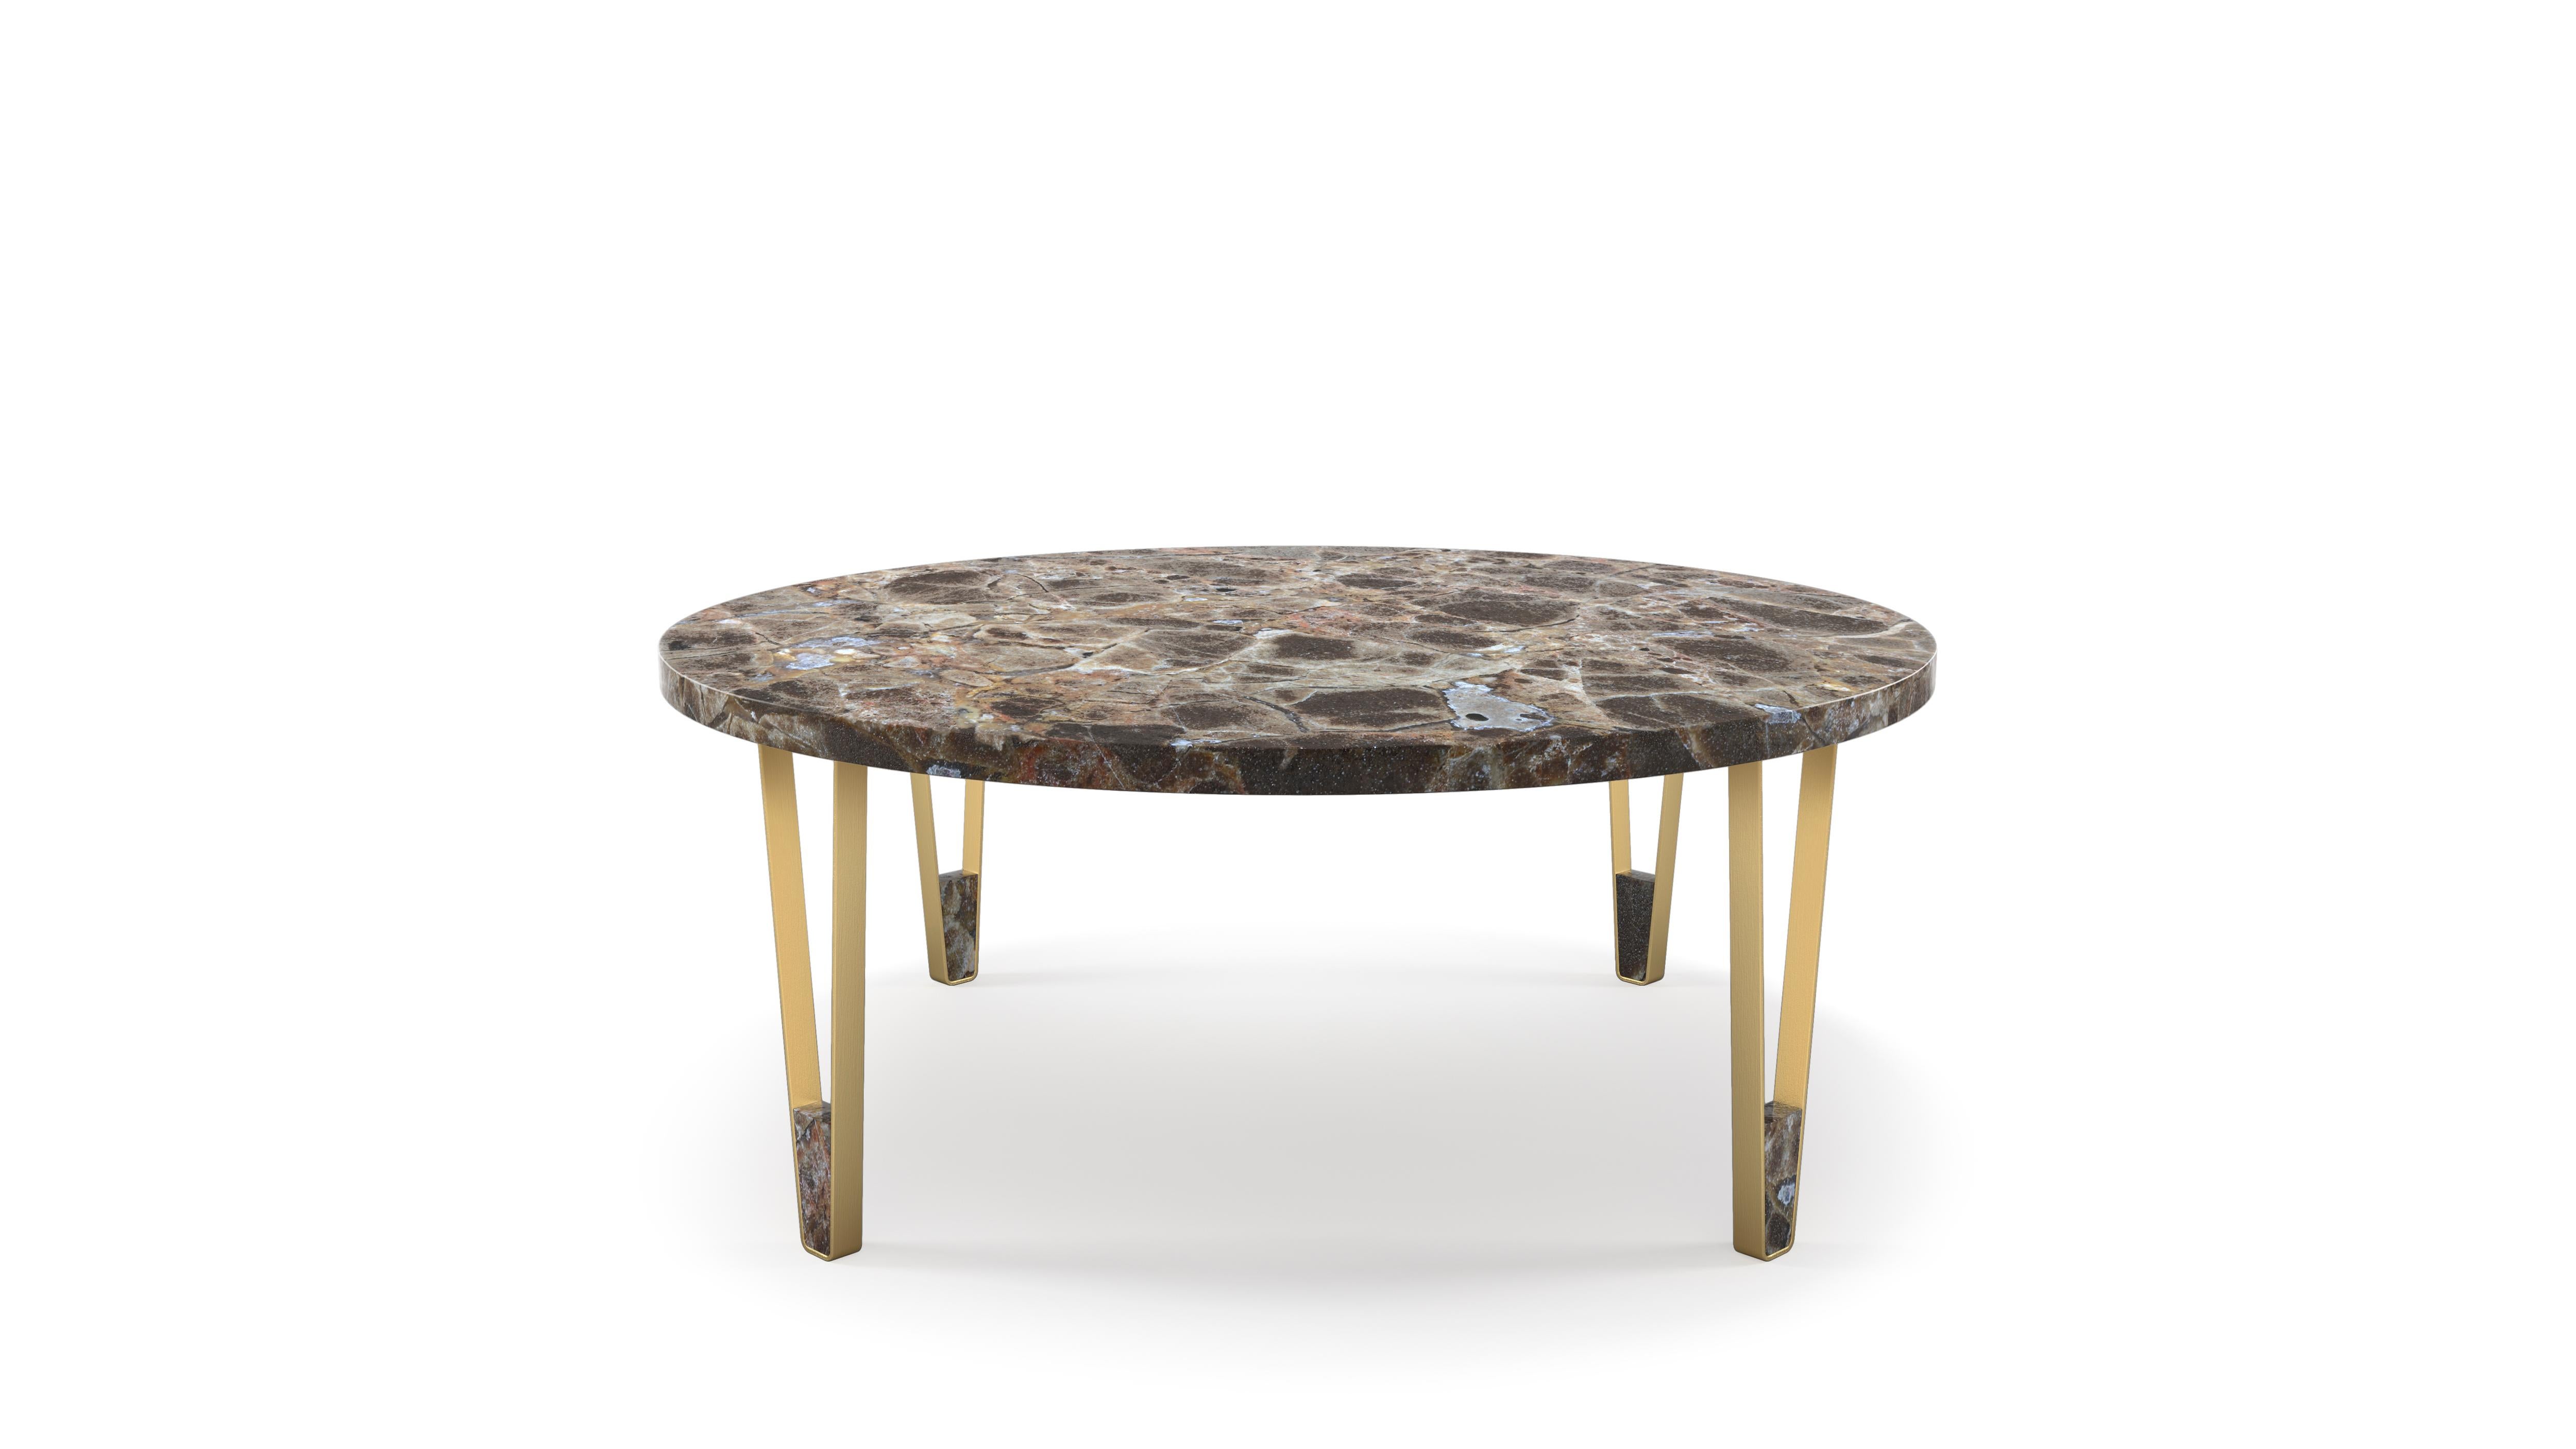 Ionic Round Emperador Marble Coffee Table by InsidherLand
Dimensions: D 100 x H 40 cm.
Materials: Emperador marble, brushed brass.
68 kg.
Other materials available.

Ionic is one of the three orders of classical architecture developed at the ancient